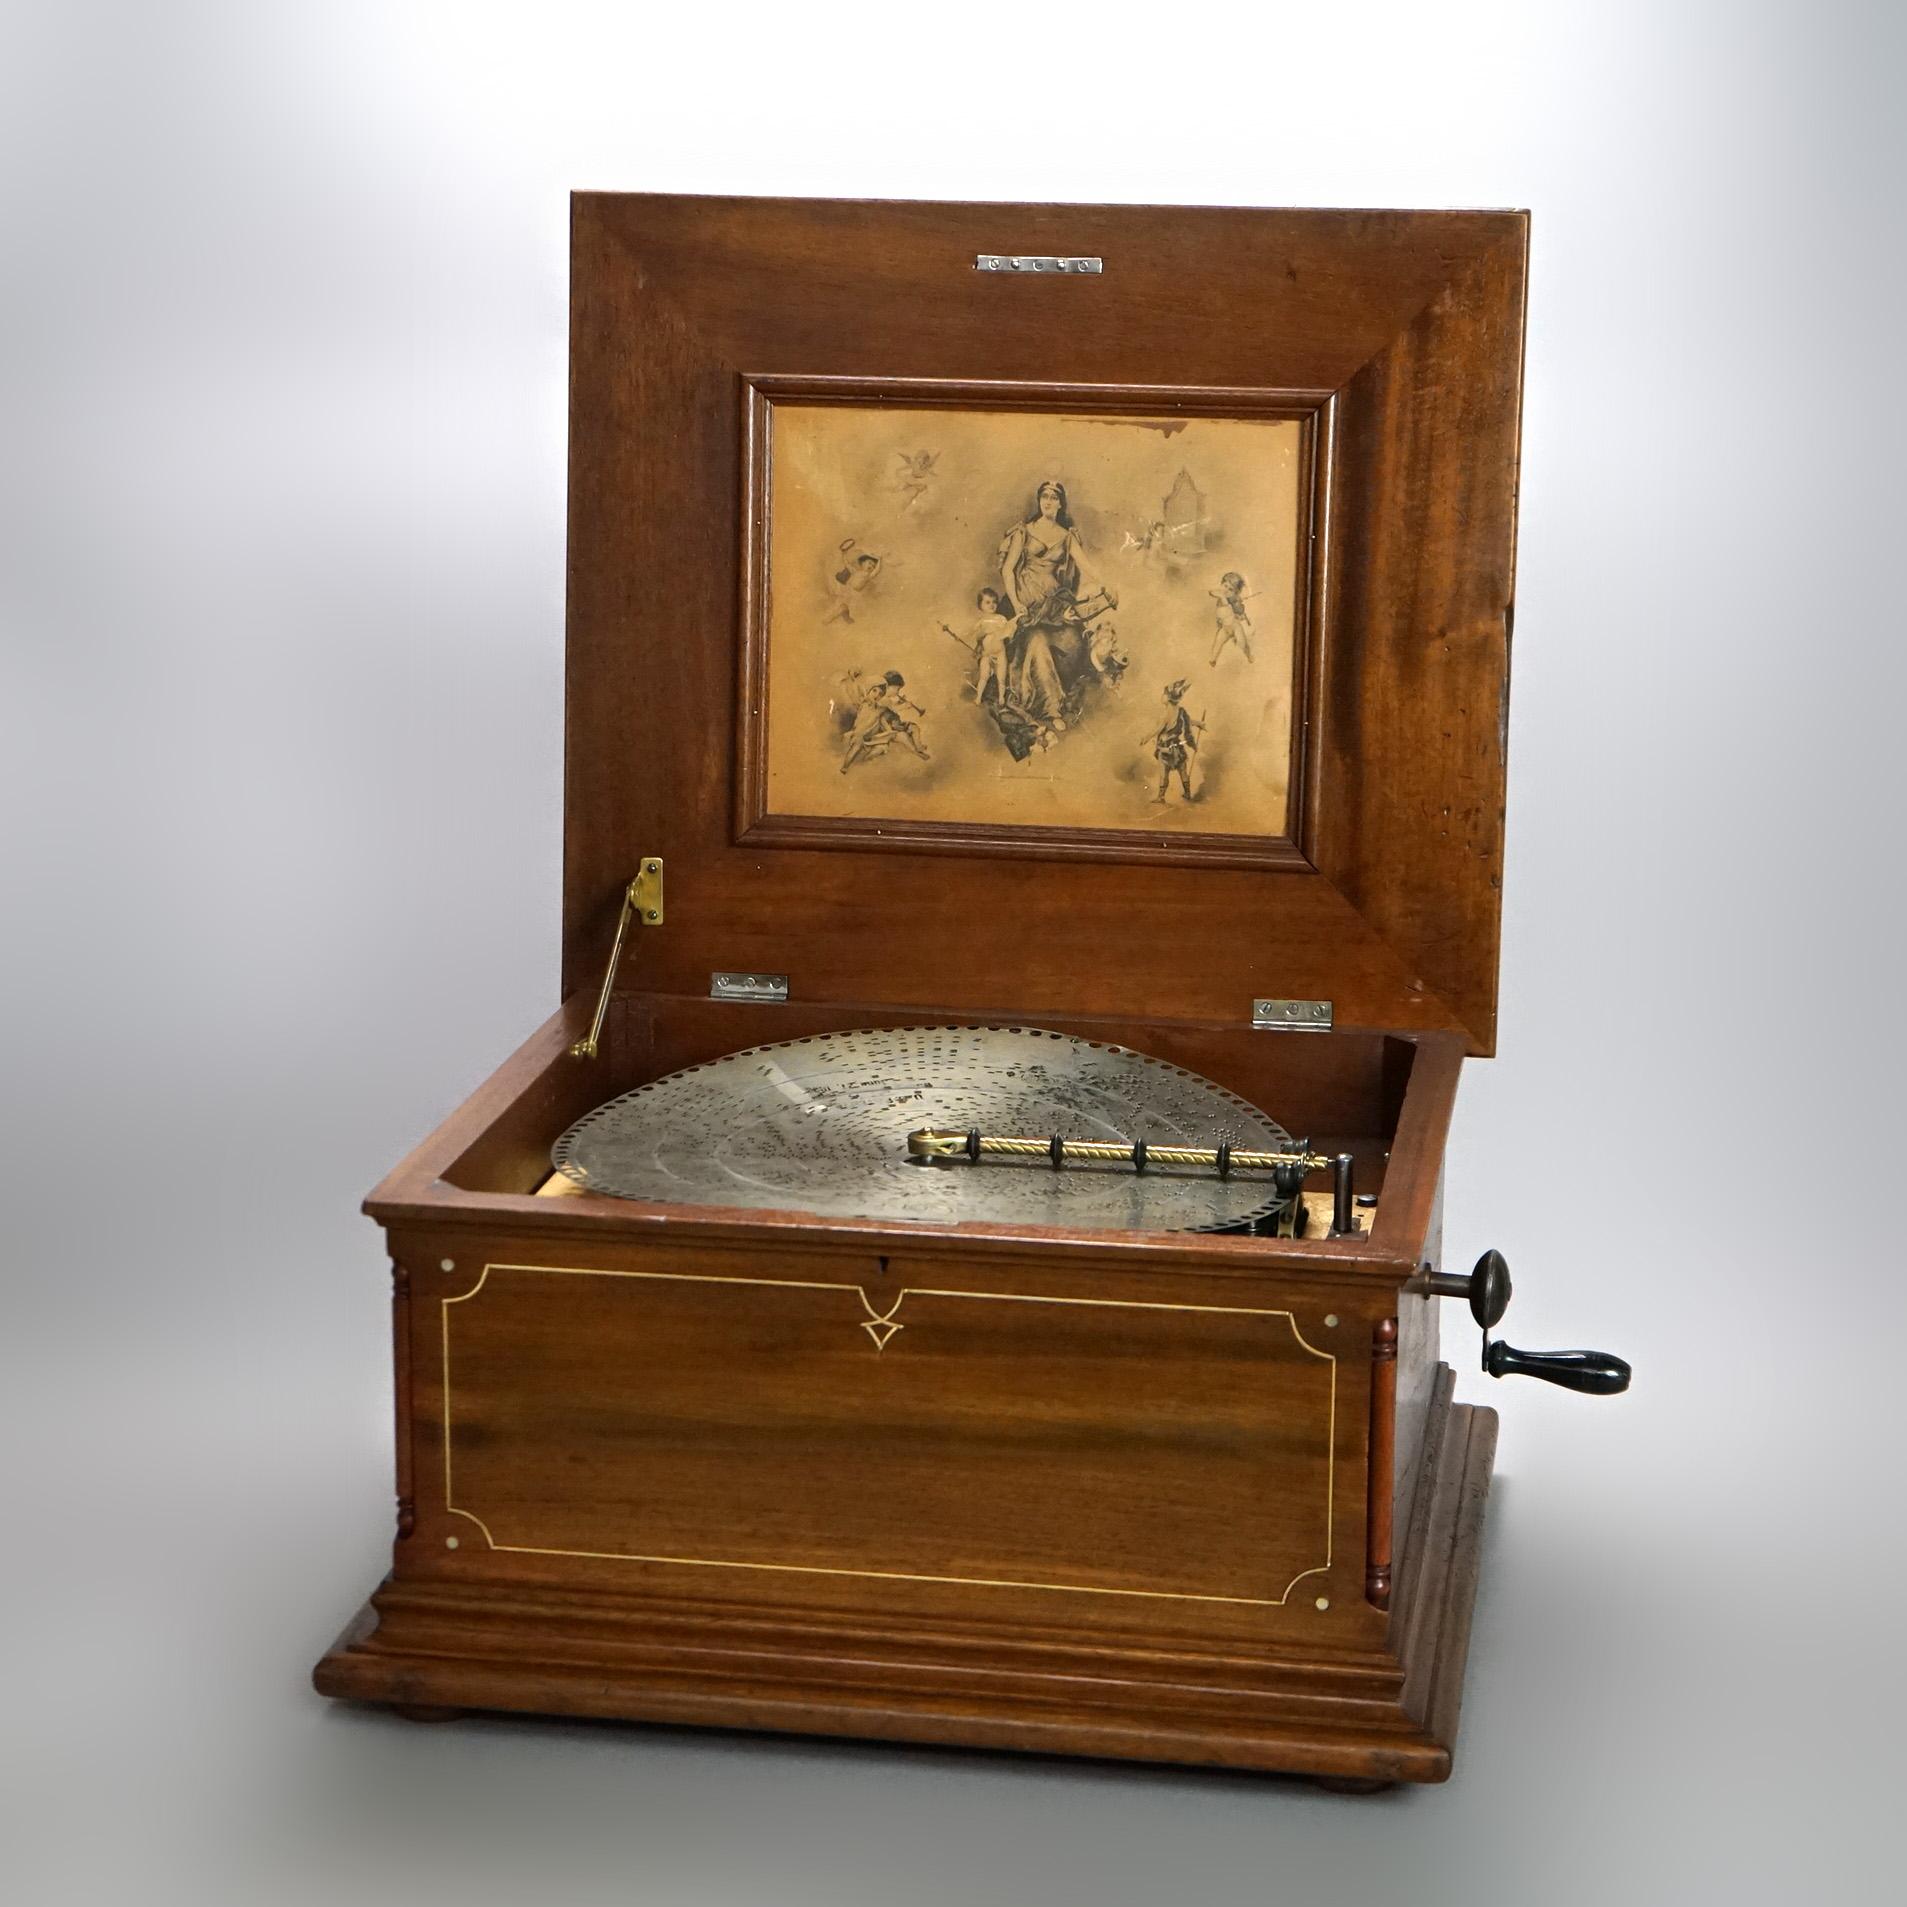 An antique Regina music box offers mahogany case with inlaid banding, serial #55116, includes five discs, 19th century

Measures - 13.25